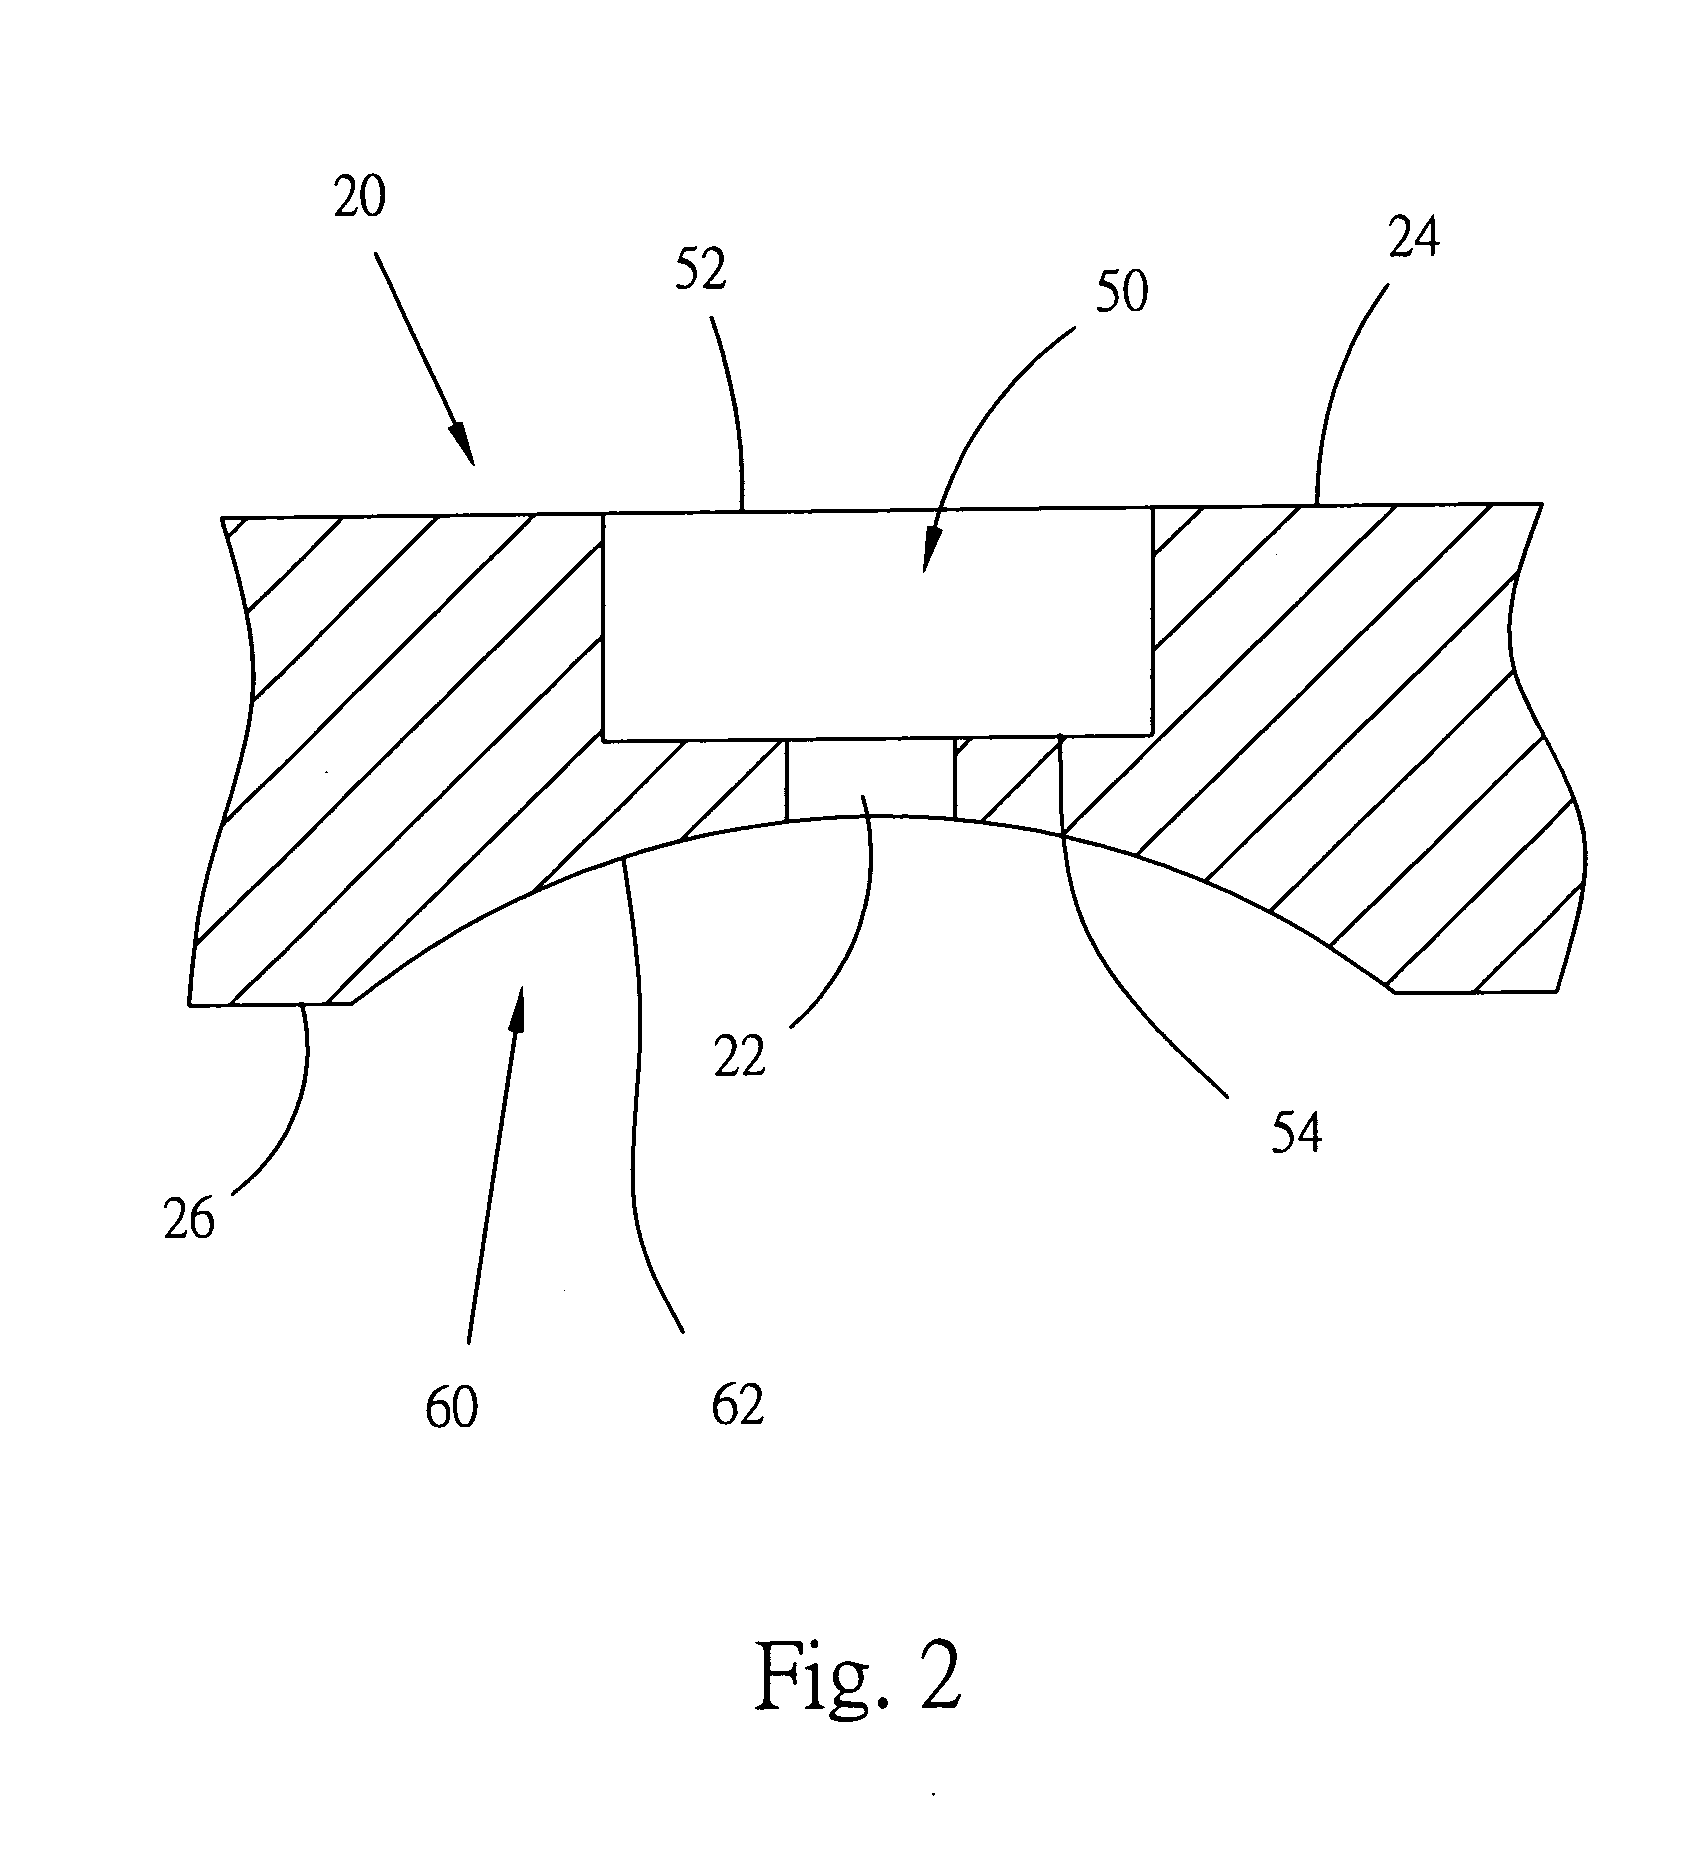 Atomizing nozzle with enhanced structural strength